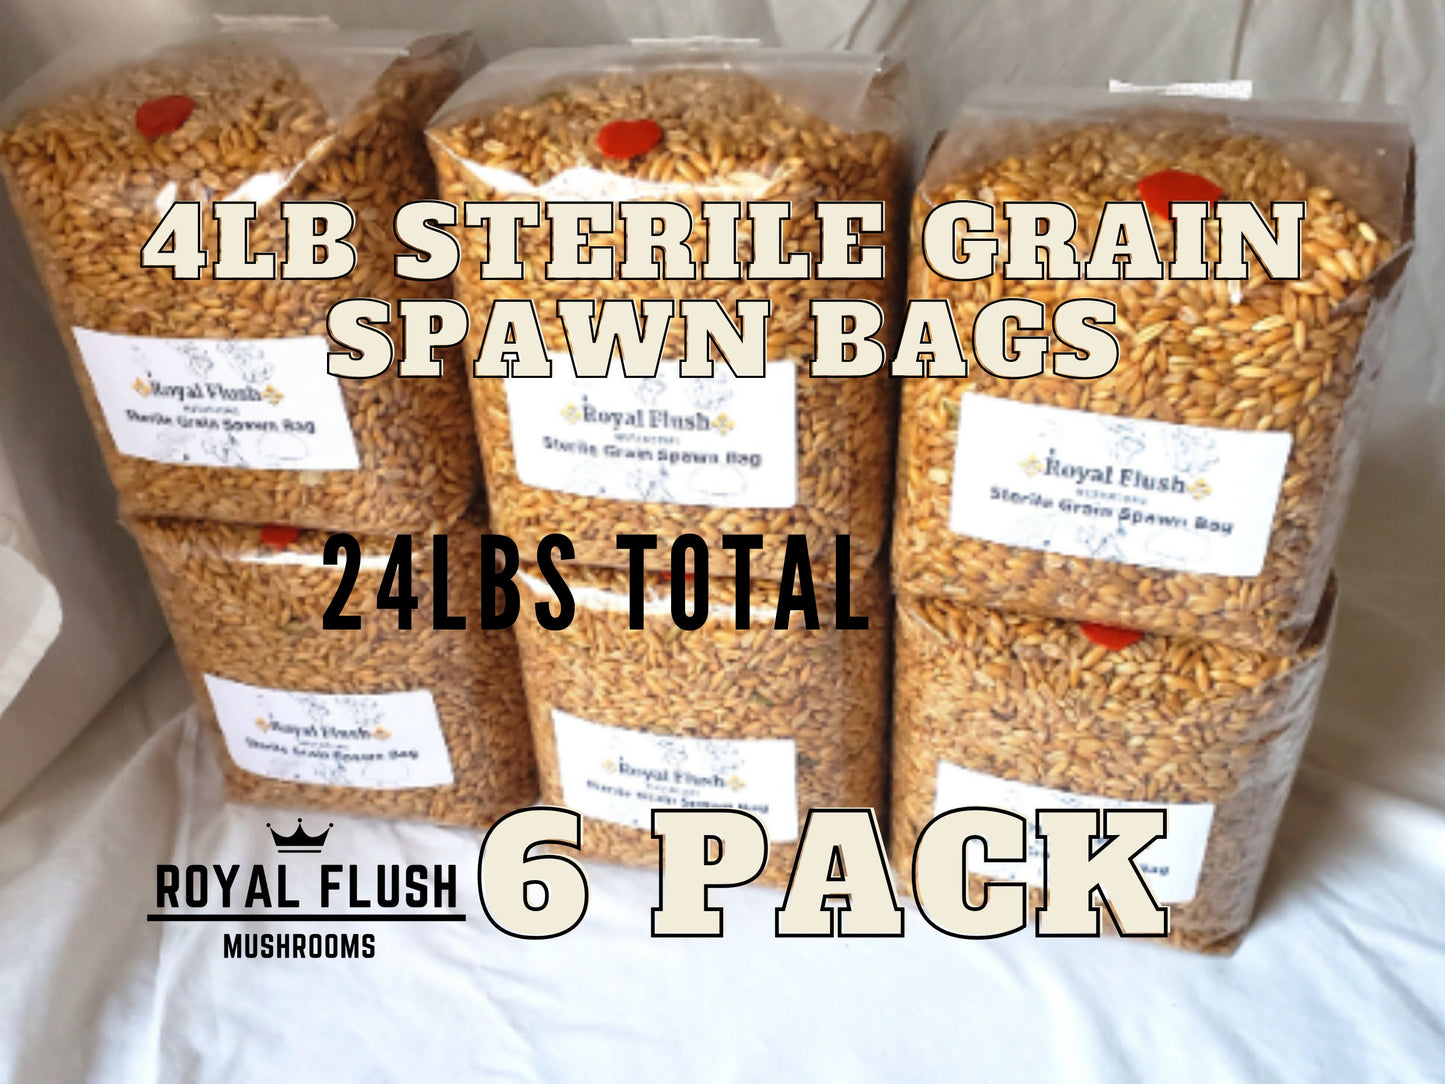 6 Pack of Sterile Grain Spawn Bags with Injection Ports (4lb each bag)